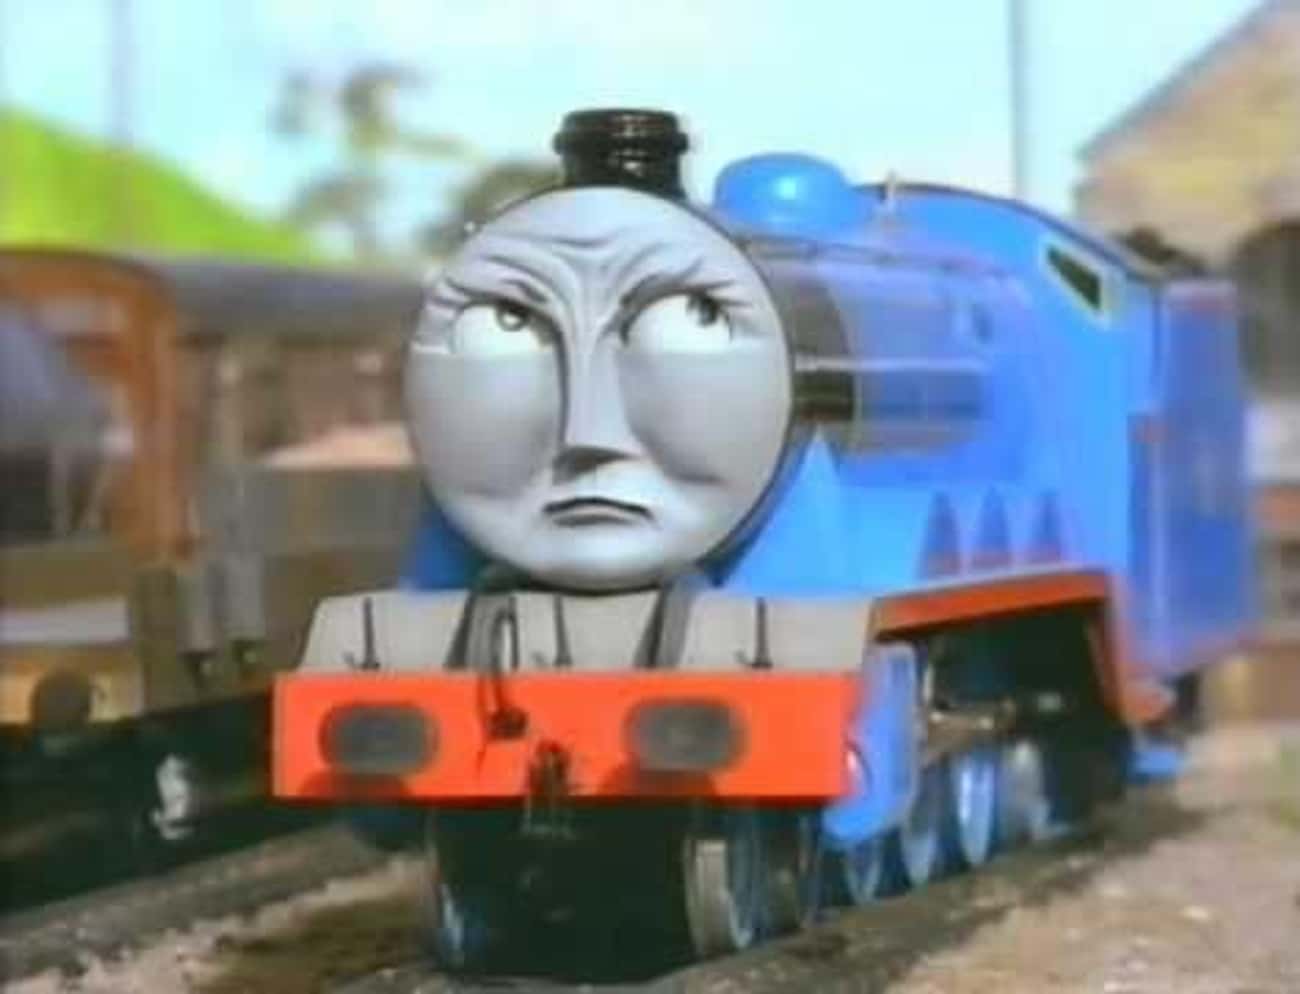 Sodor Might Represent Awdry's Need For Order